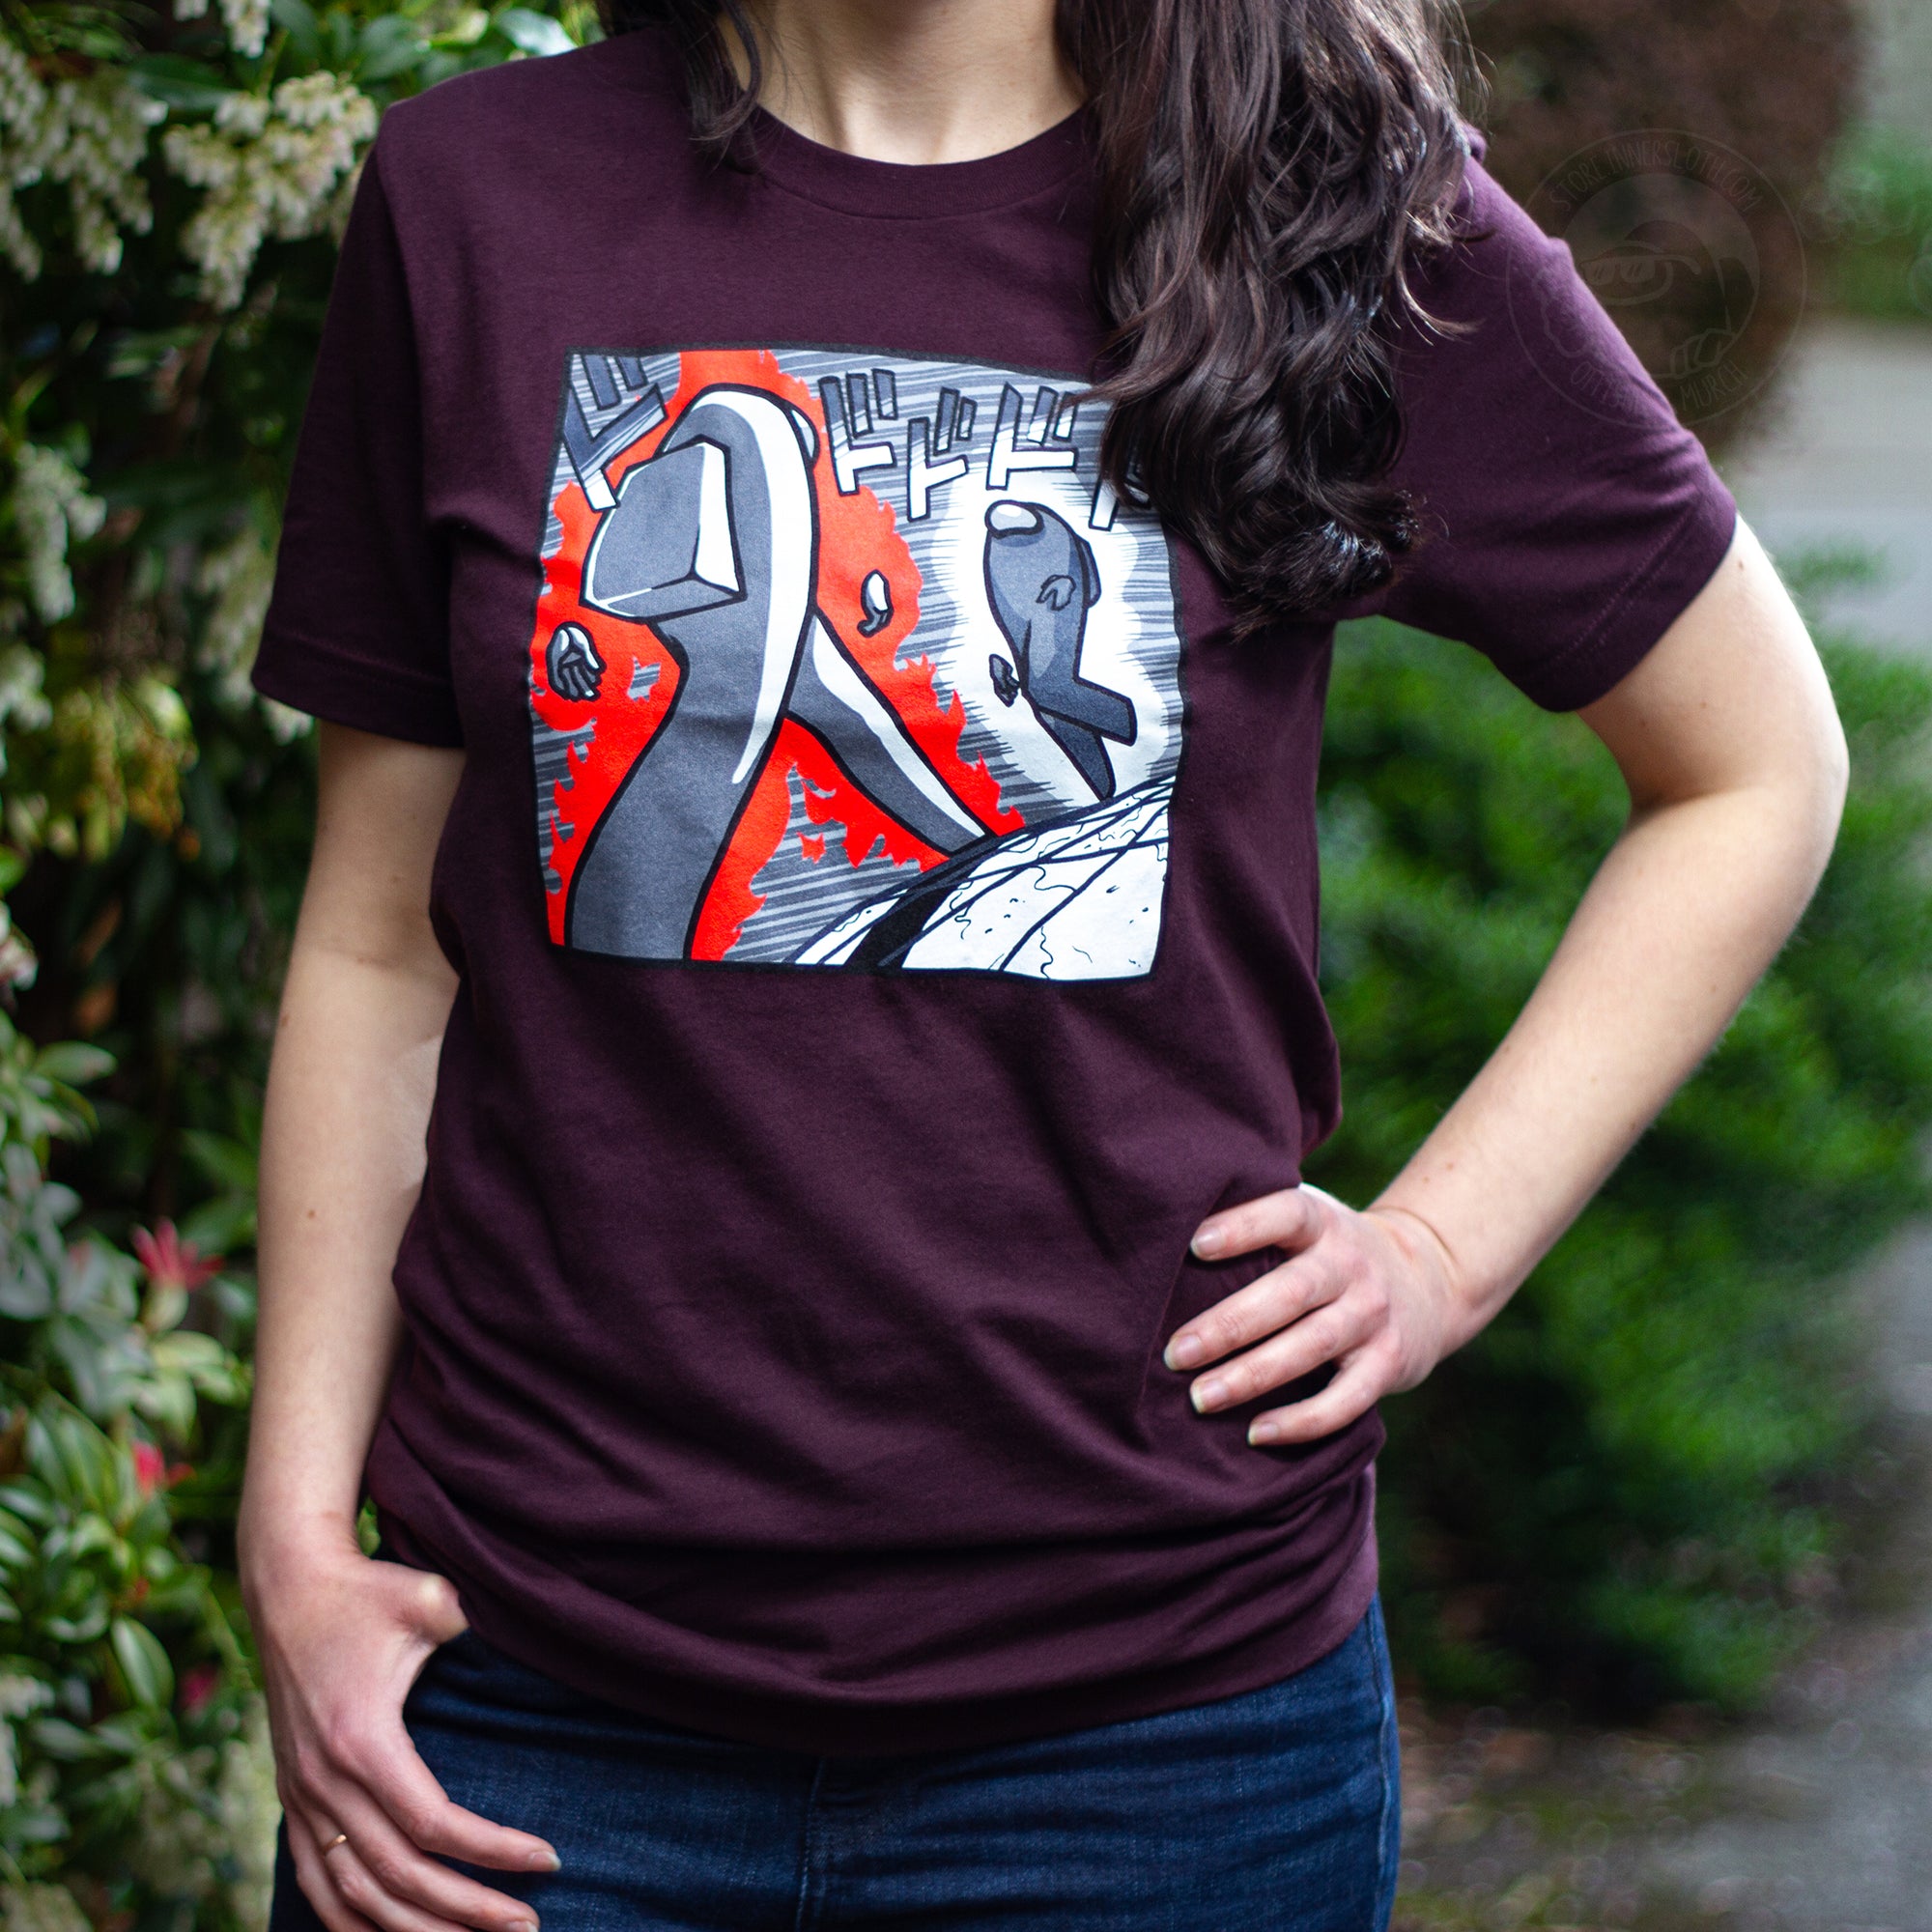  A flat lay photograph of the Among Us: Menacing T-Shirt. The maroon shirt depicts one long-legged crewmate striding to another, replicating the iconic scene from JoJo's Bizarre Adventure.